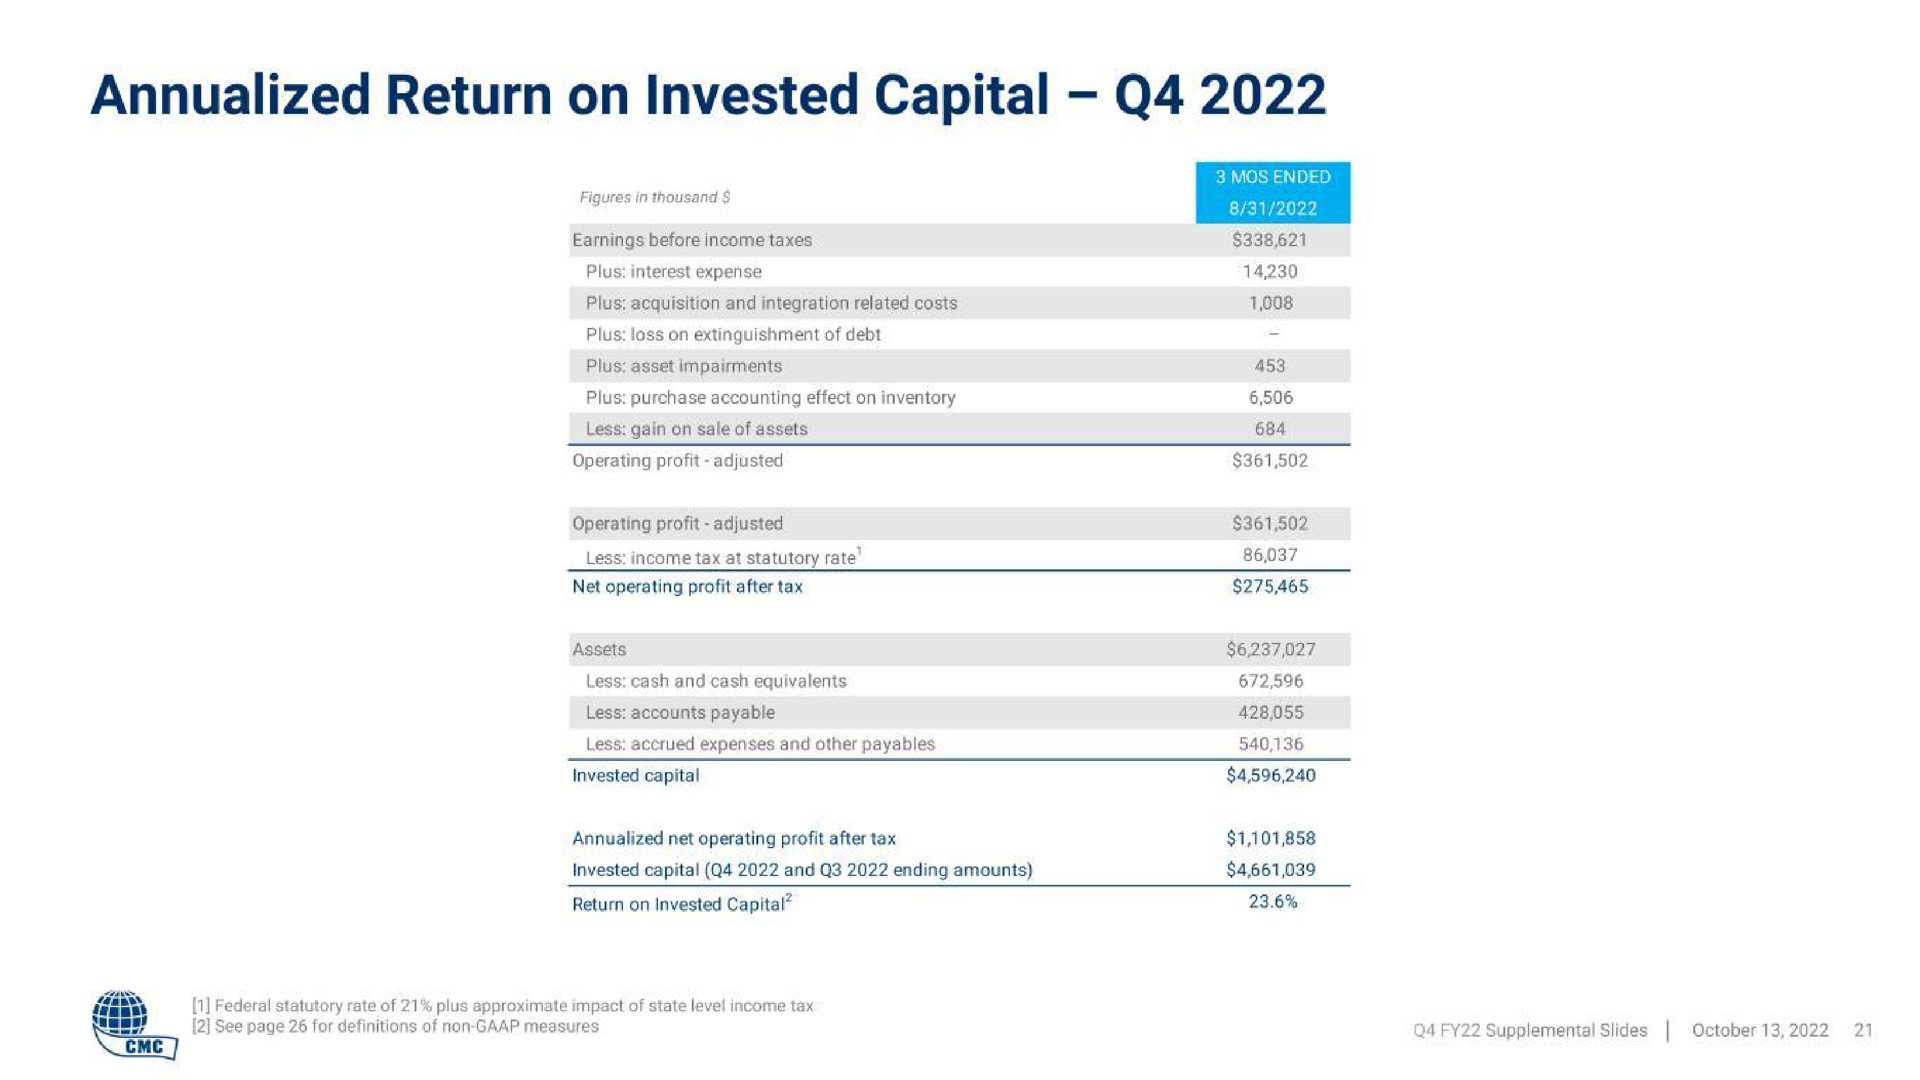 return on invested capital | Commercial Metals Company